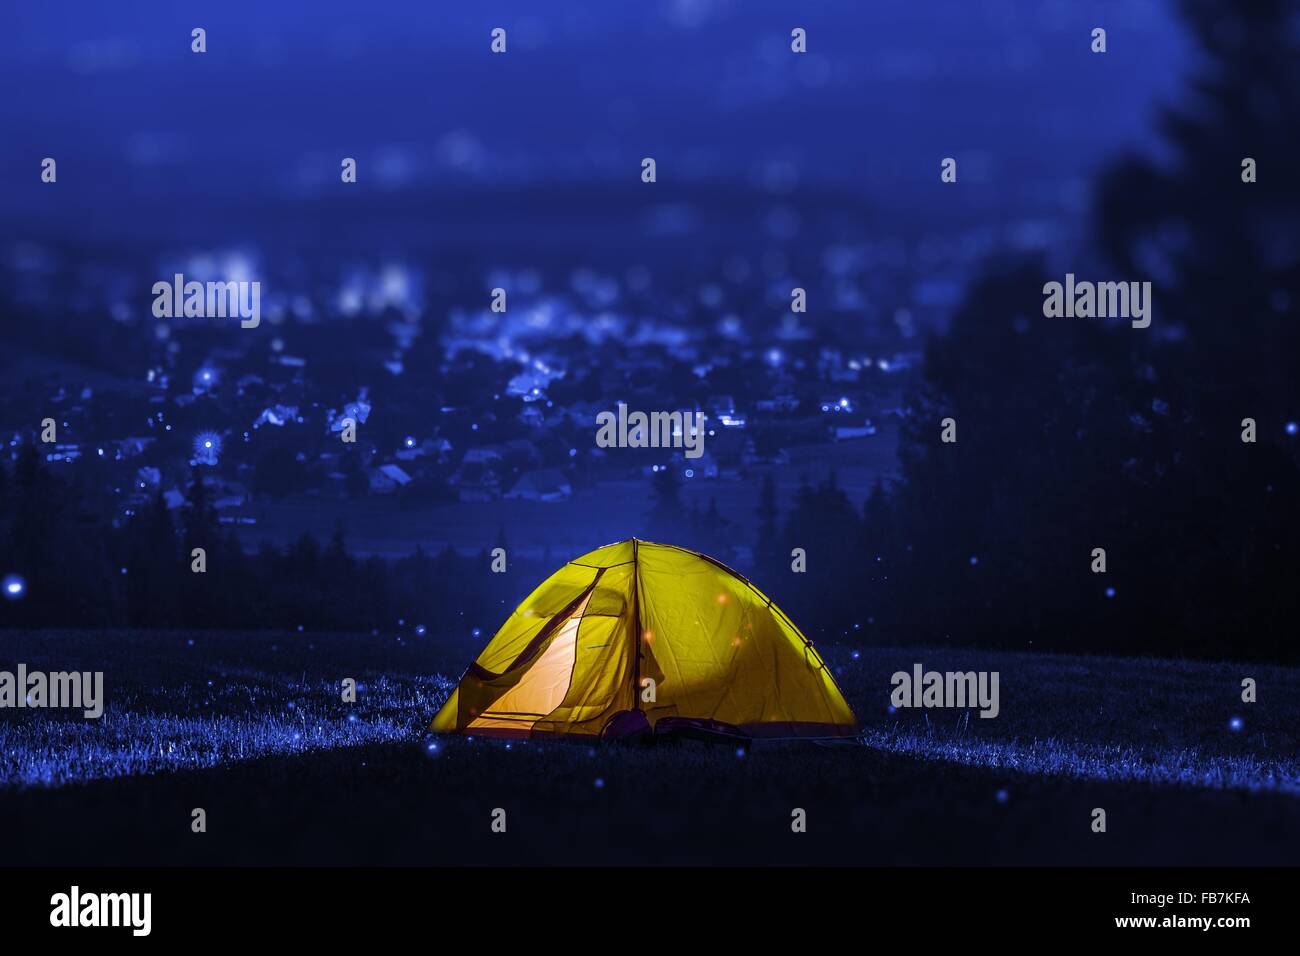 Campsite Near City. Small Tent Camping with City View. Outdoor Recreation Theme. Stock Photo